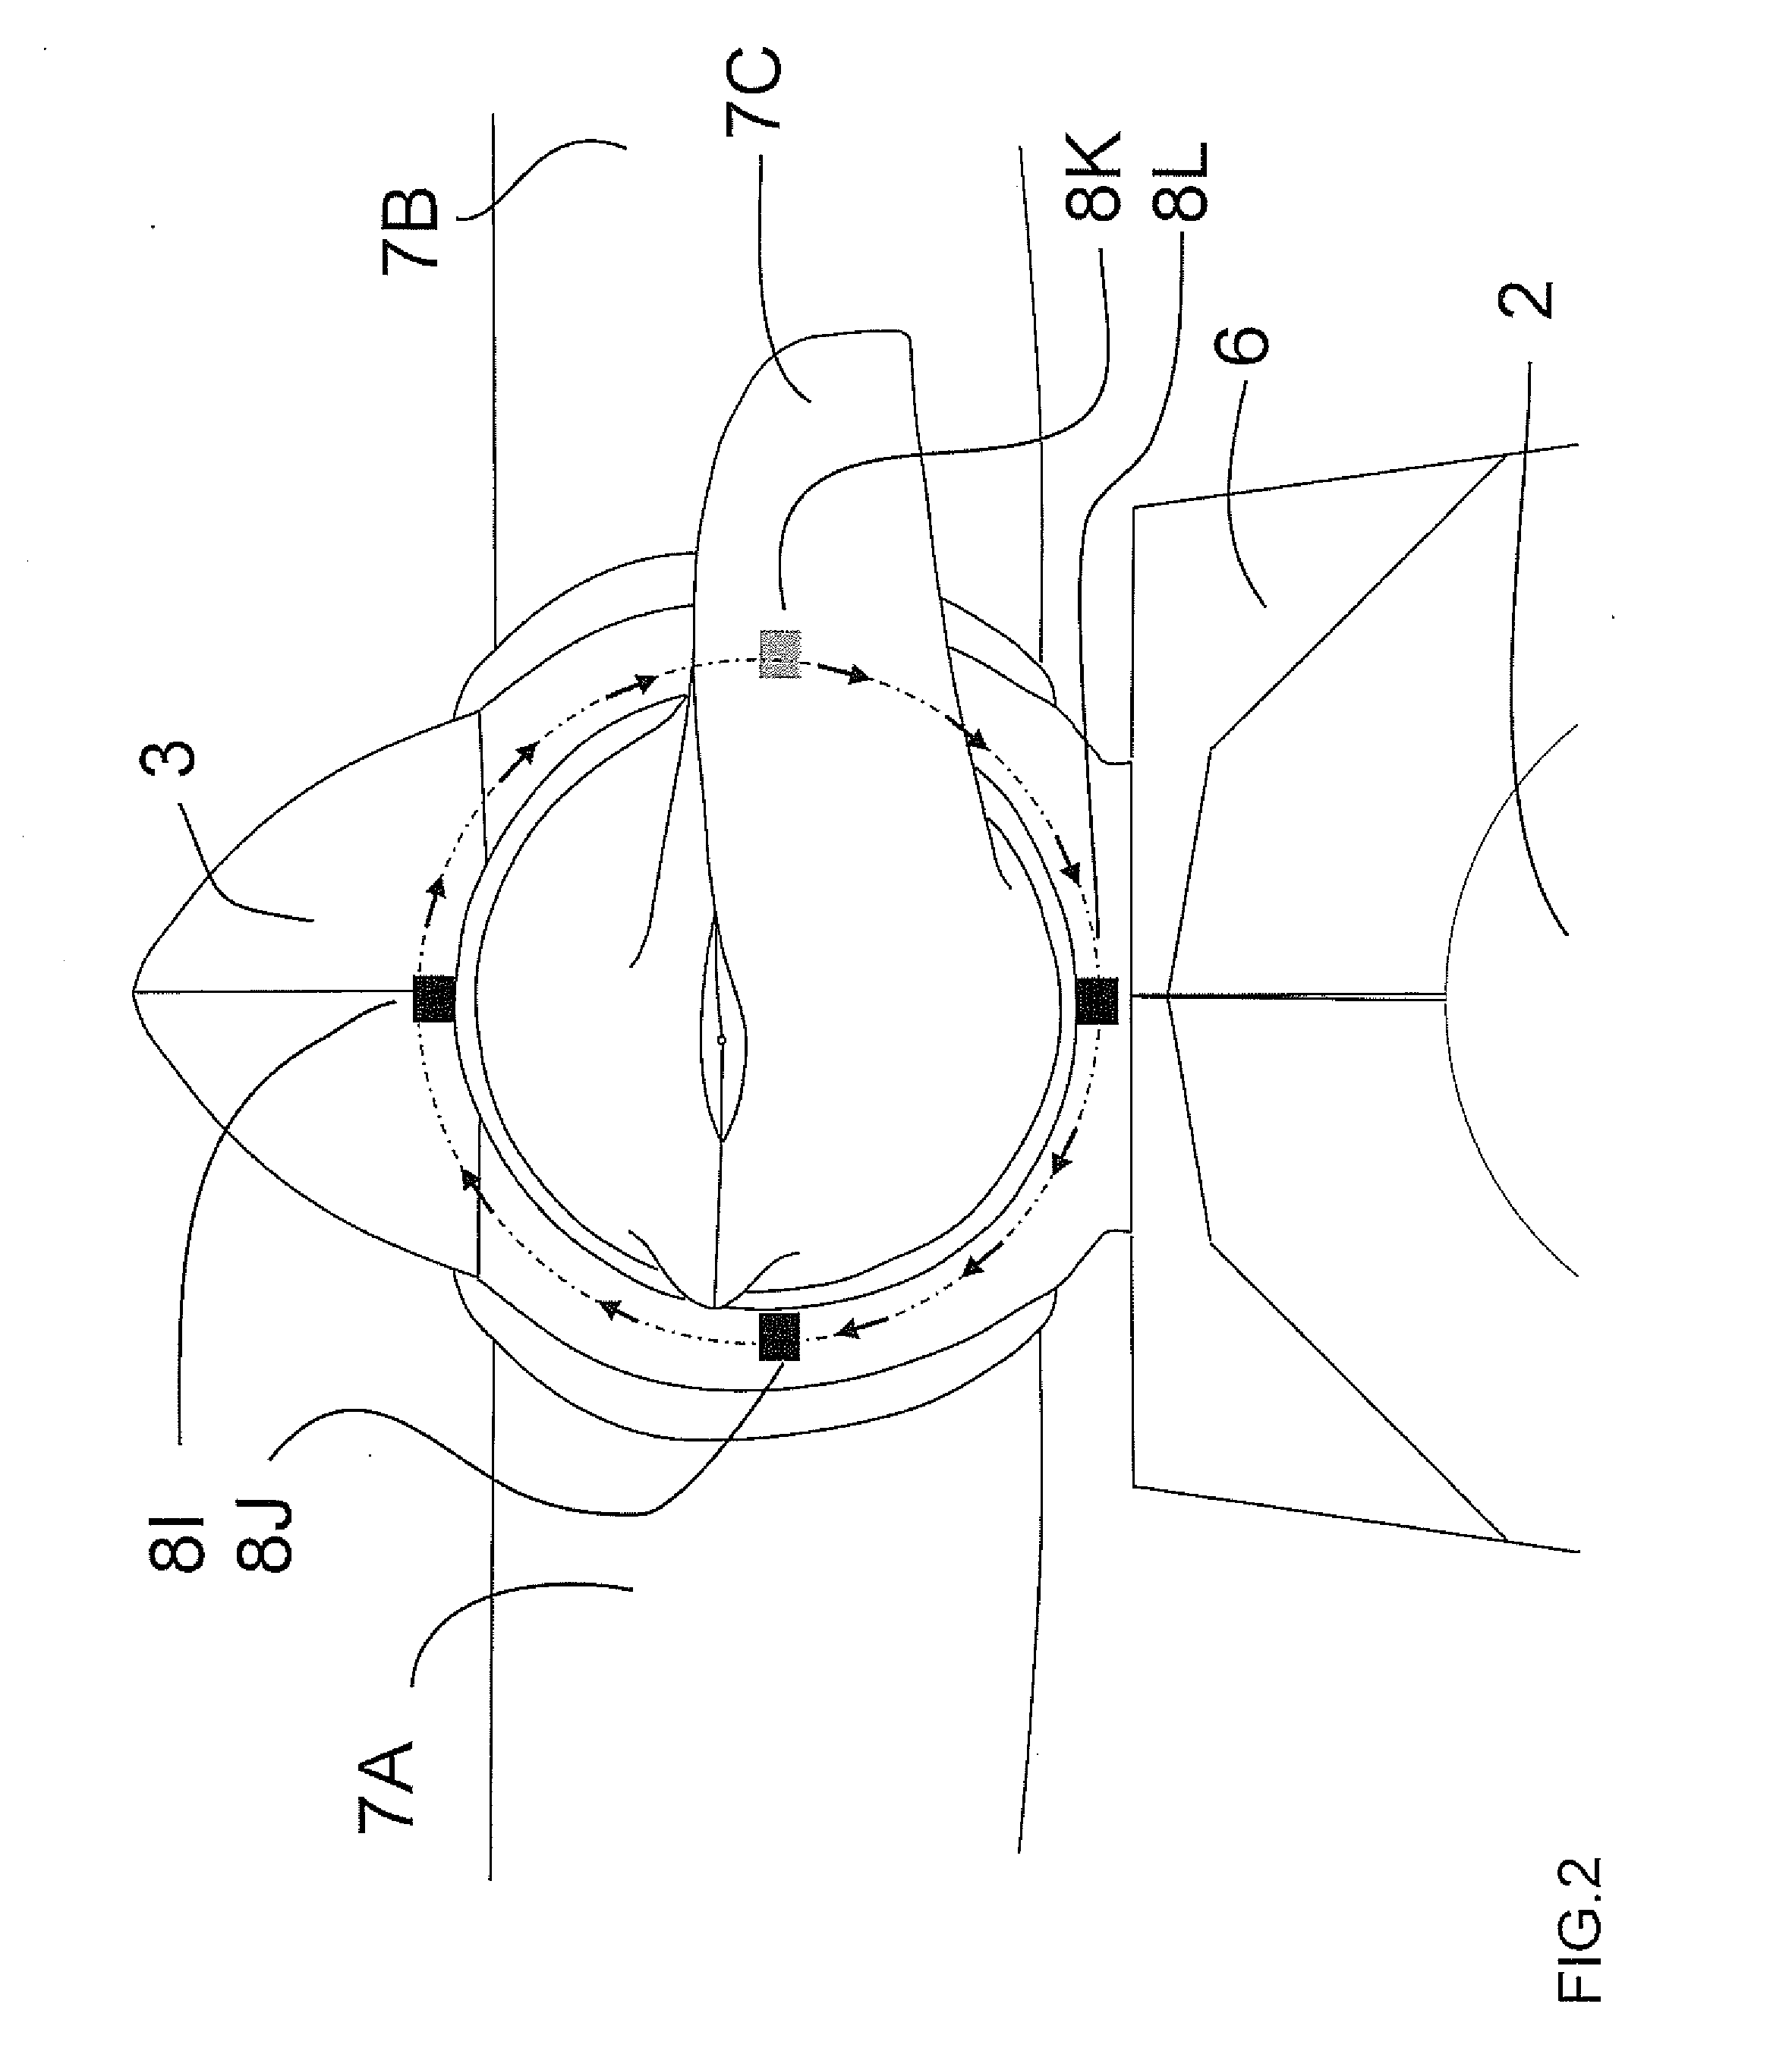 Method for Detecting Deflection of the Blades of a Wind Turbine